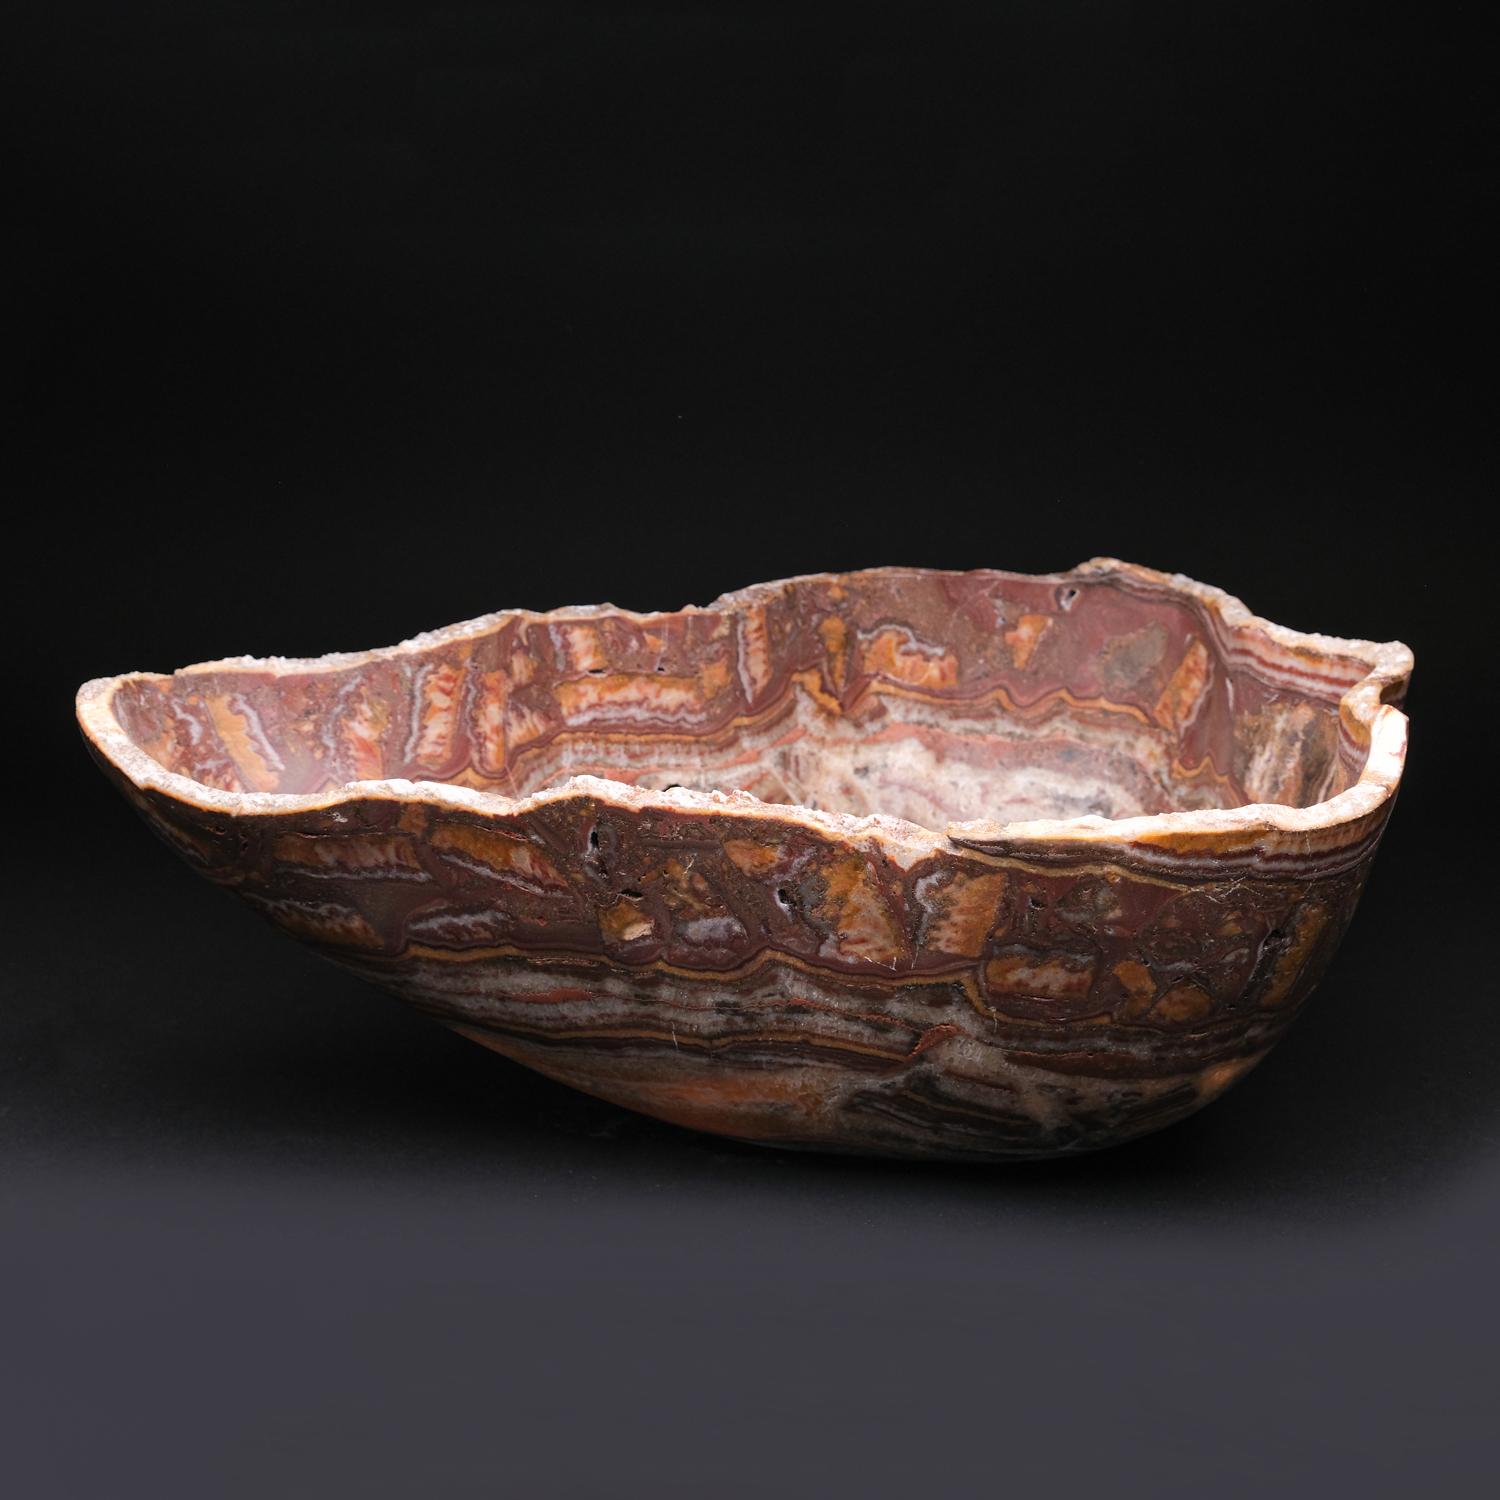 Contemporary  Polished Onyx Bowl from Mexico (14.4 Lbs) For Sale